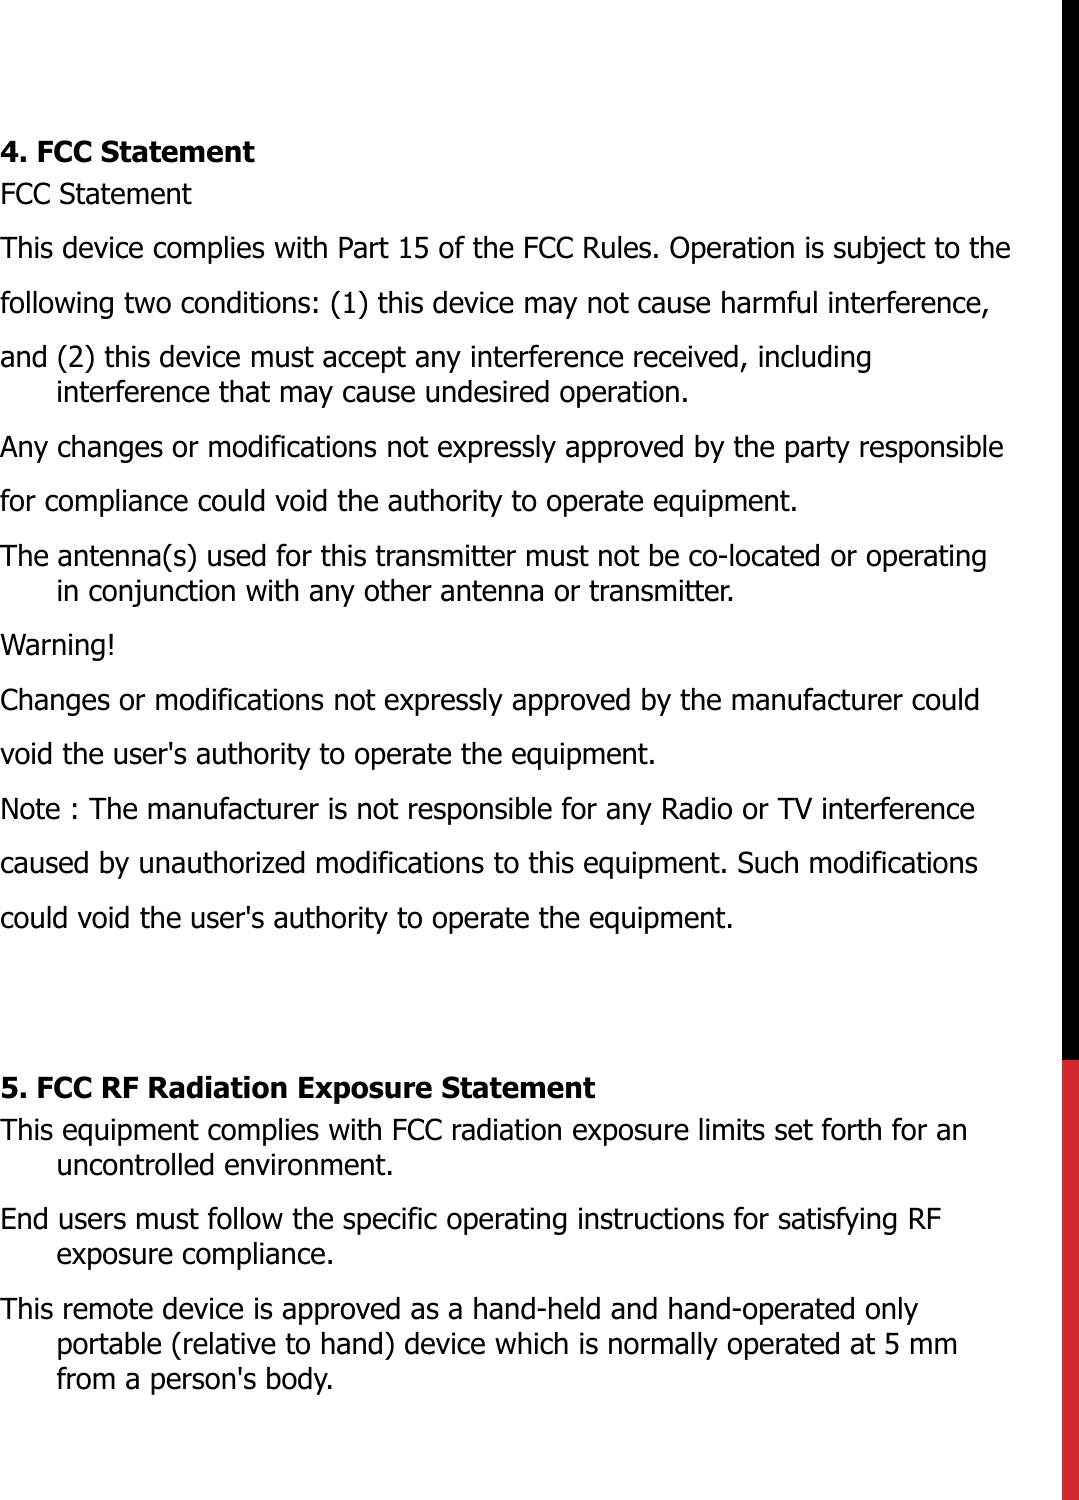 4. FCC StatementFCC StatementThis device complies with Part 15 of the FCC Rules. Operation is subject to thefollowing two conditions: (1) this device may not cause harmful interference,and (2) this device must accept any interference received, including interference that may cause undesired operation.Any changes or modifications not expressly approved by the party responsiblefor compliance could void the authority to operate equipment.The antenna(s) used for this transmitter must not be co-located or operating in conjunction with any other antenna or transmitter.Warning!Changes or modifications not expressly approved by the manufacturer couldvoid the user&apos;s authority to operate the equipment.Note : The manufacturer is not responsible for any Radio or TV interferencecaused by unauthorized modifications to this equipment. Such modificationscould void the user&apos;s authority to operate the equipment.5. FCC RF Radiation Exposure Statement This equipment complies with FCC radiation exposure limits set forth for an uncontrolled environment. End users must follow the specific operating instructions for satisfying RF exposure compliance.This remote device is approved as a hand-held and hand-operated only portable (relative to hand) device which is normally operated at 5 mm from a person&apos;s body.